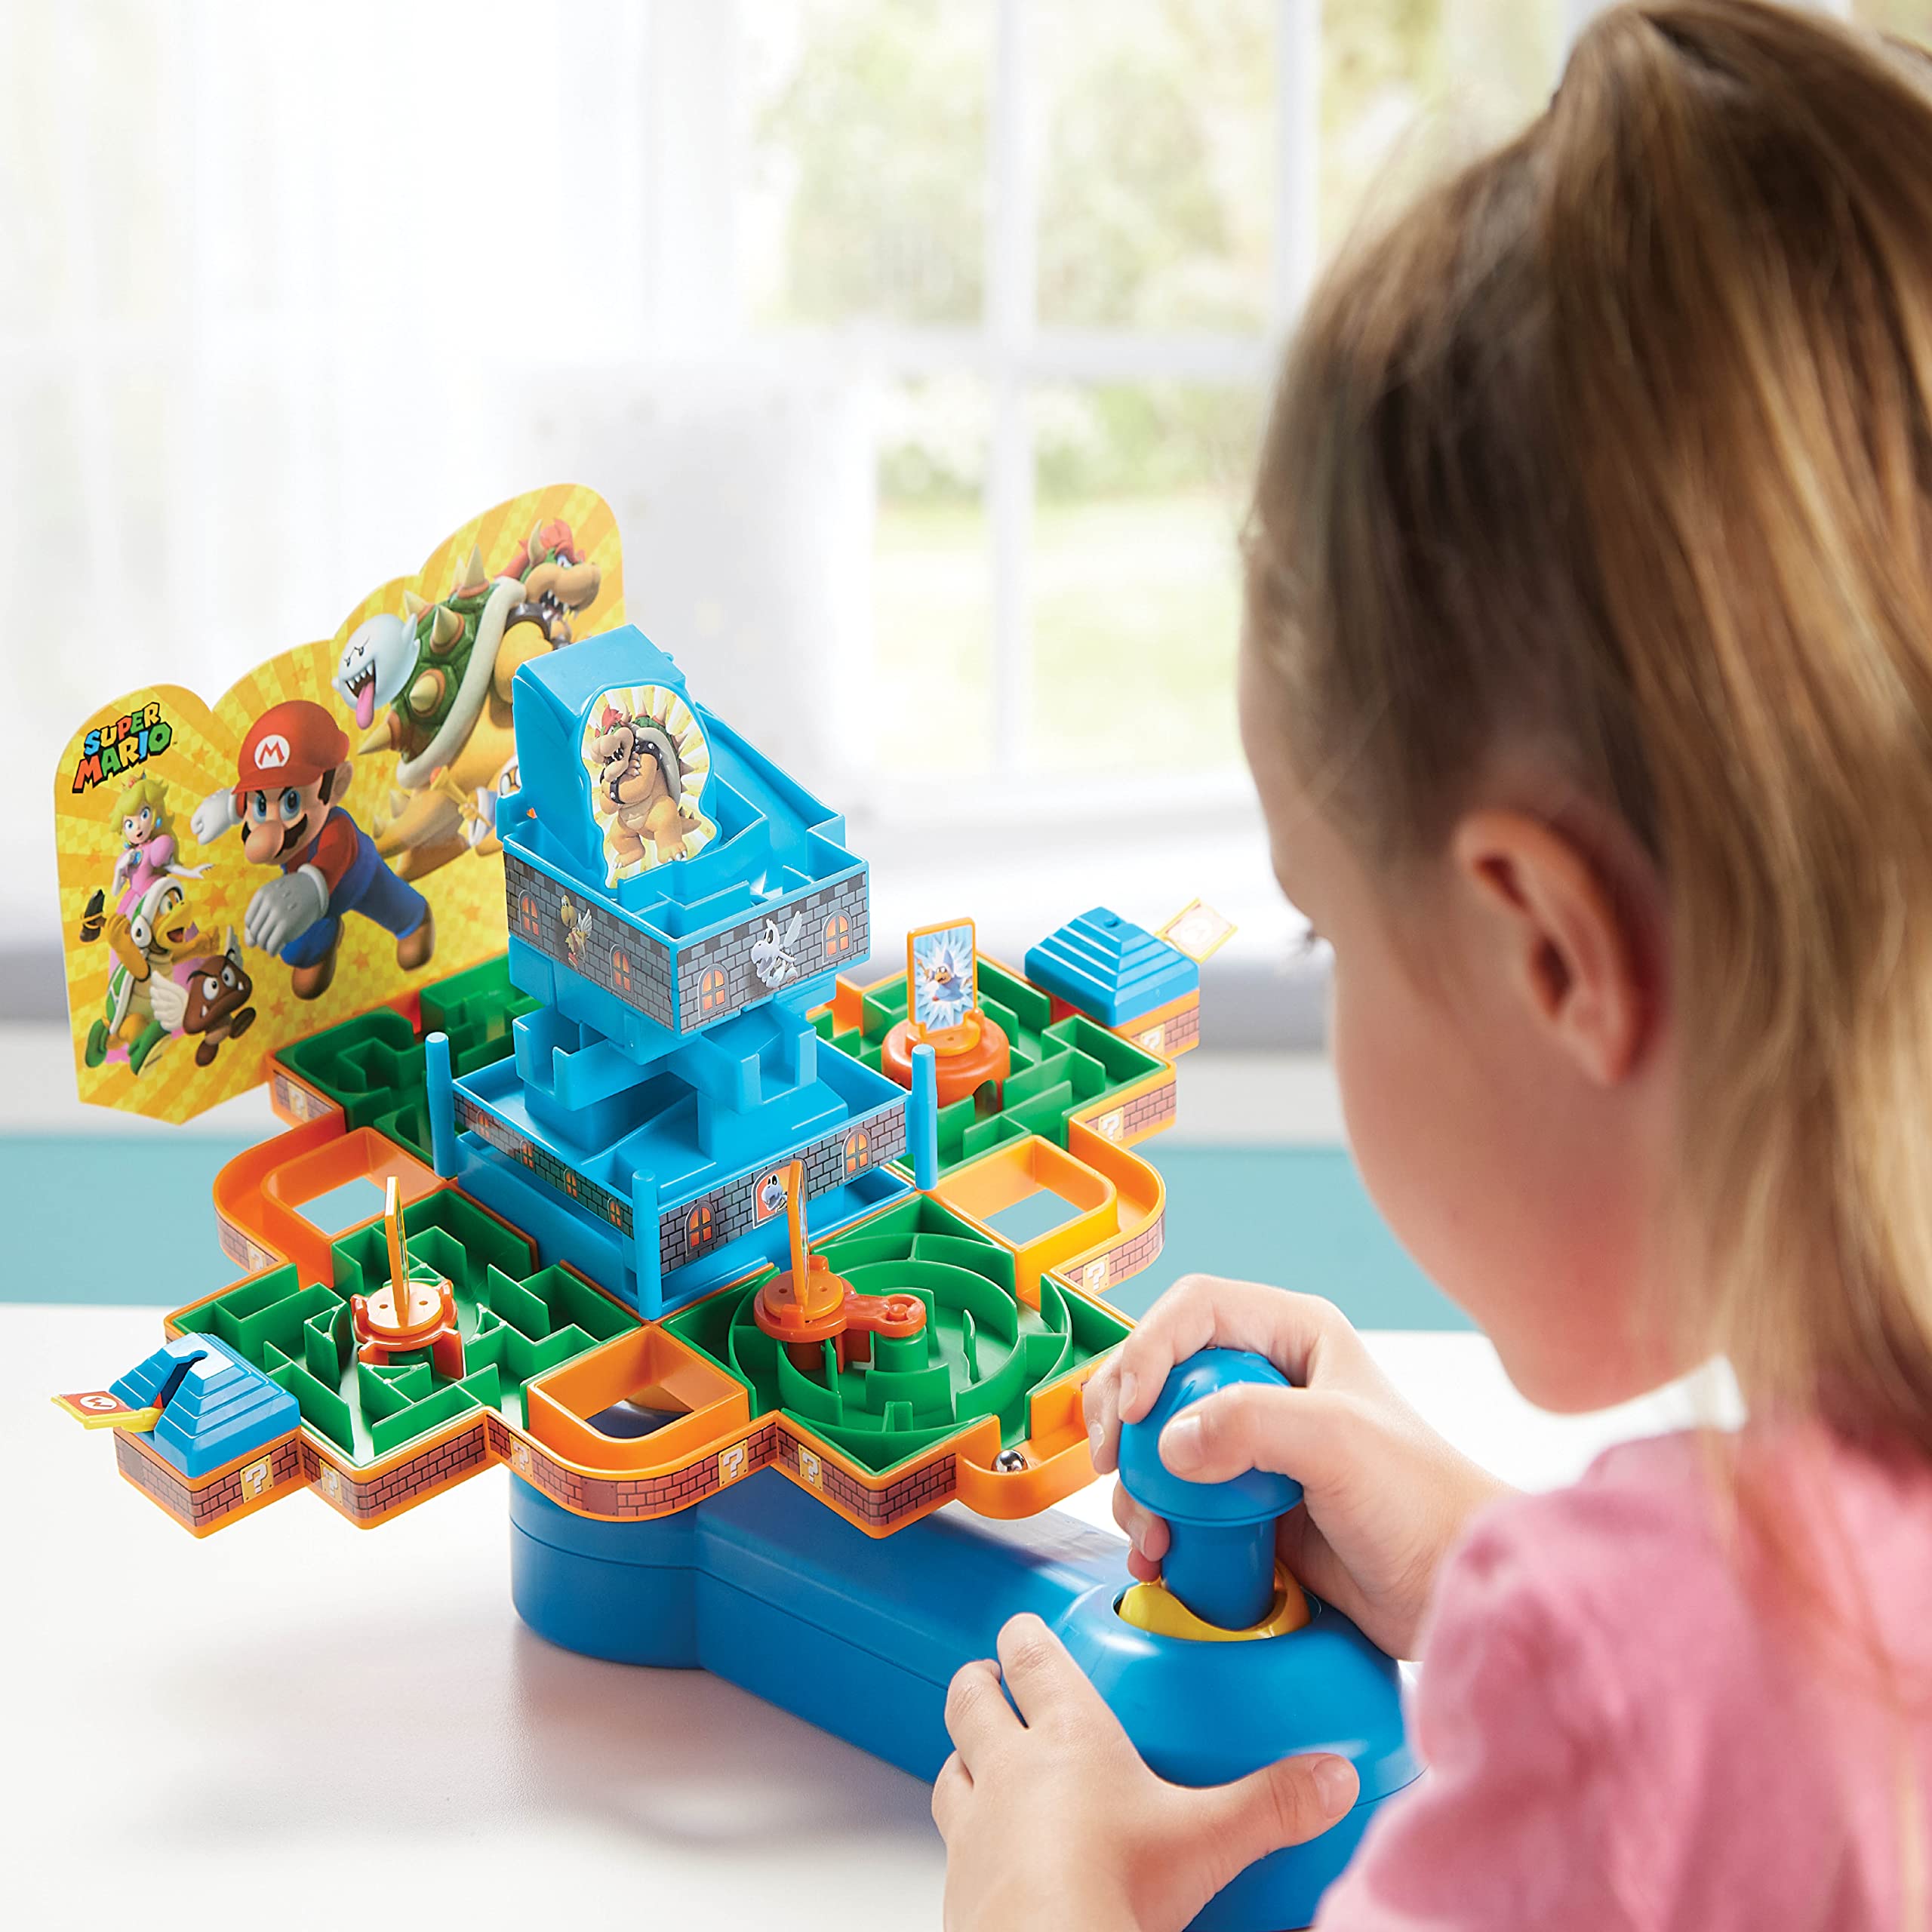 EPOCH Super Mario Maze Game Deluxe from, Single Player Tabletop Action Game for Ages 4+, Multi